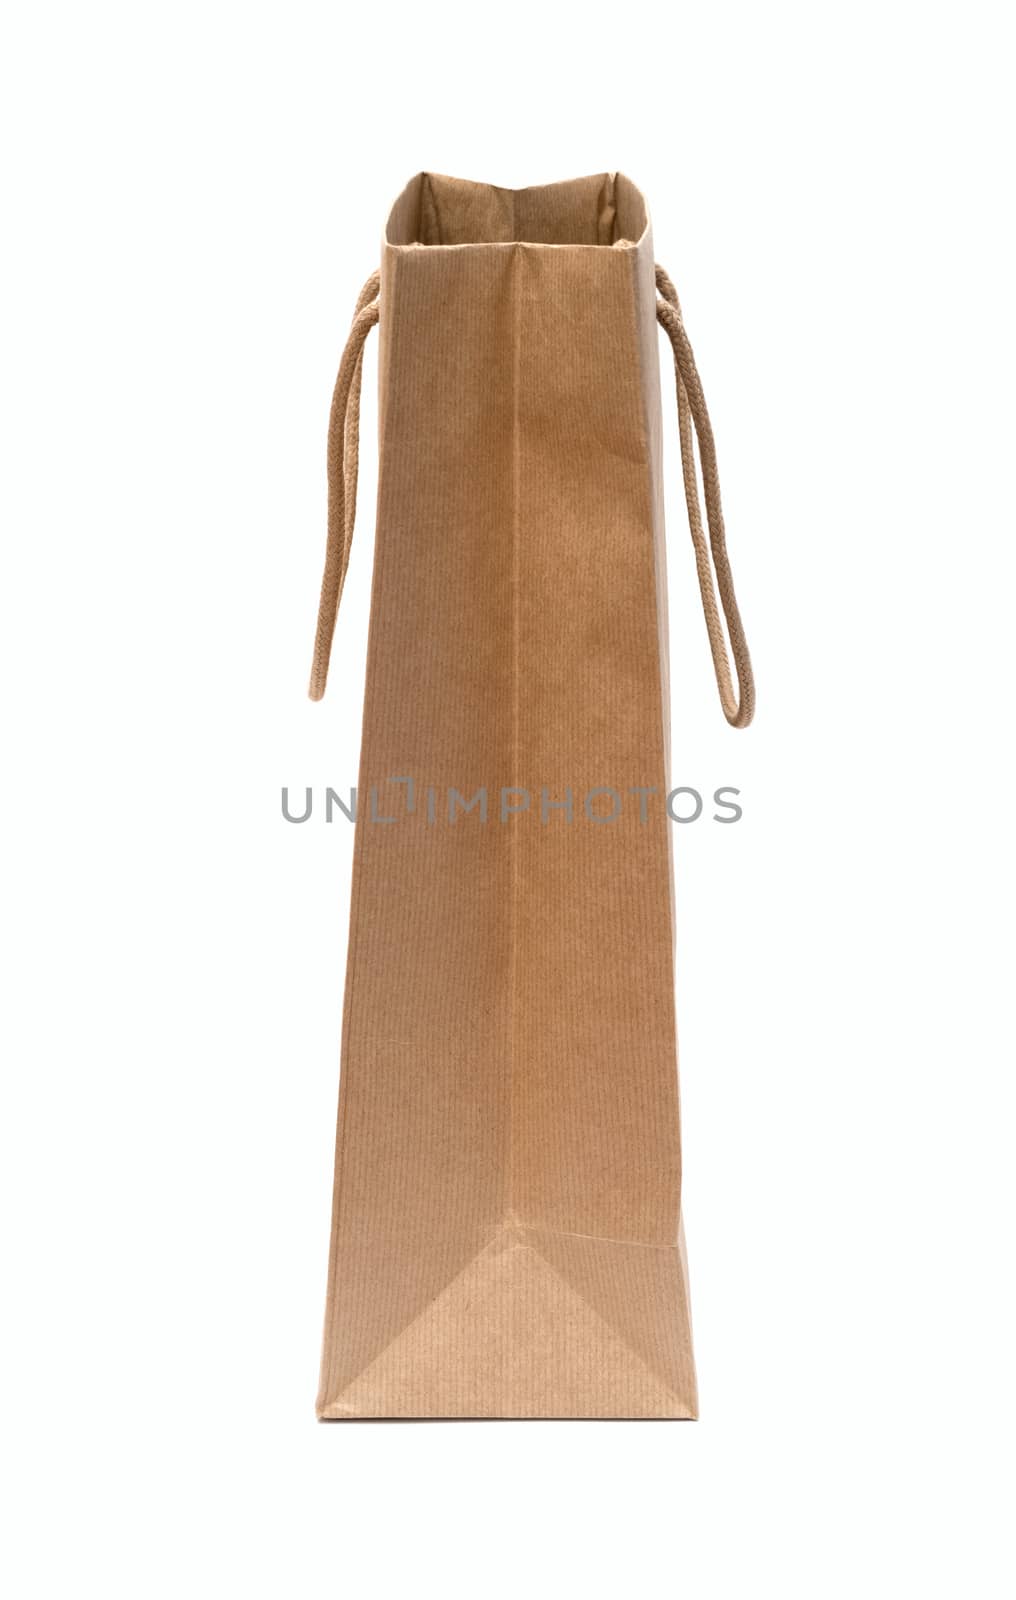 Empty brown paper bag isolated on white background by DNKSTUDIO